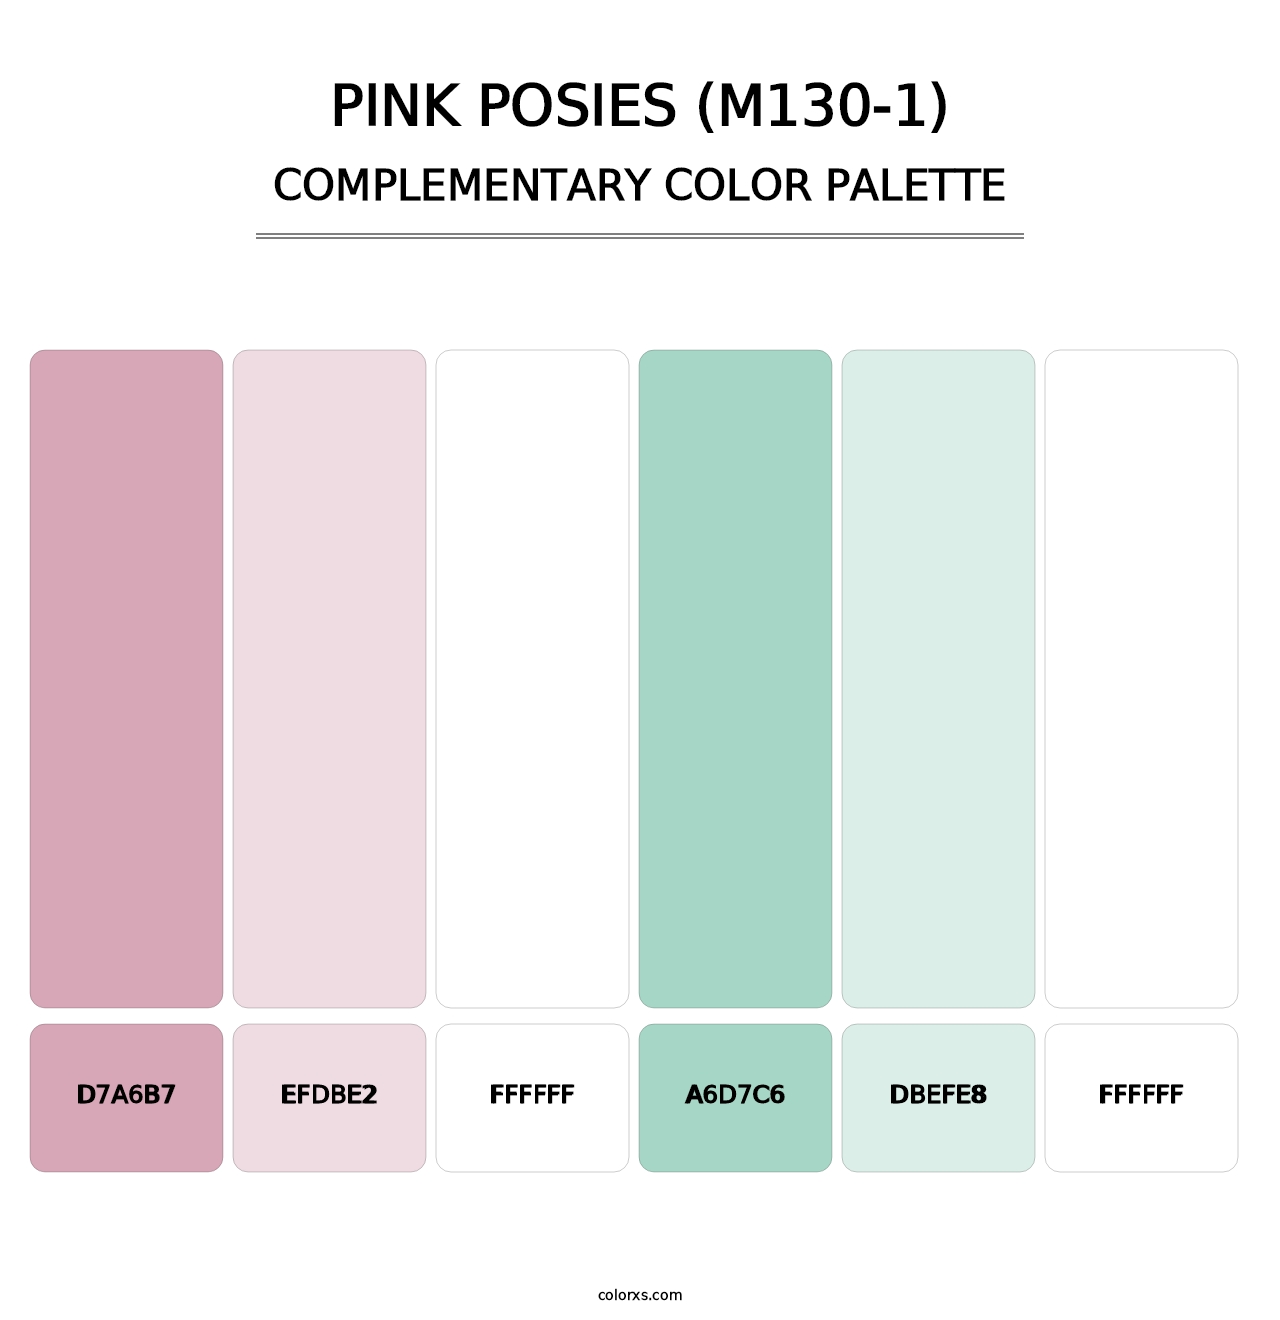 Pink Posies (M130-1) - Complementary Color Palette